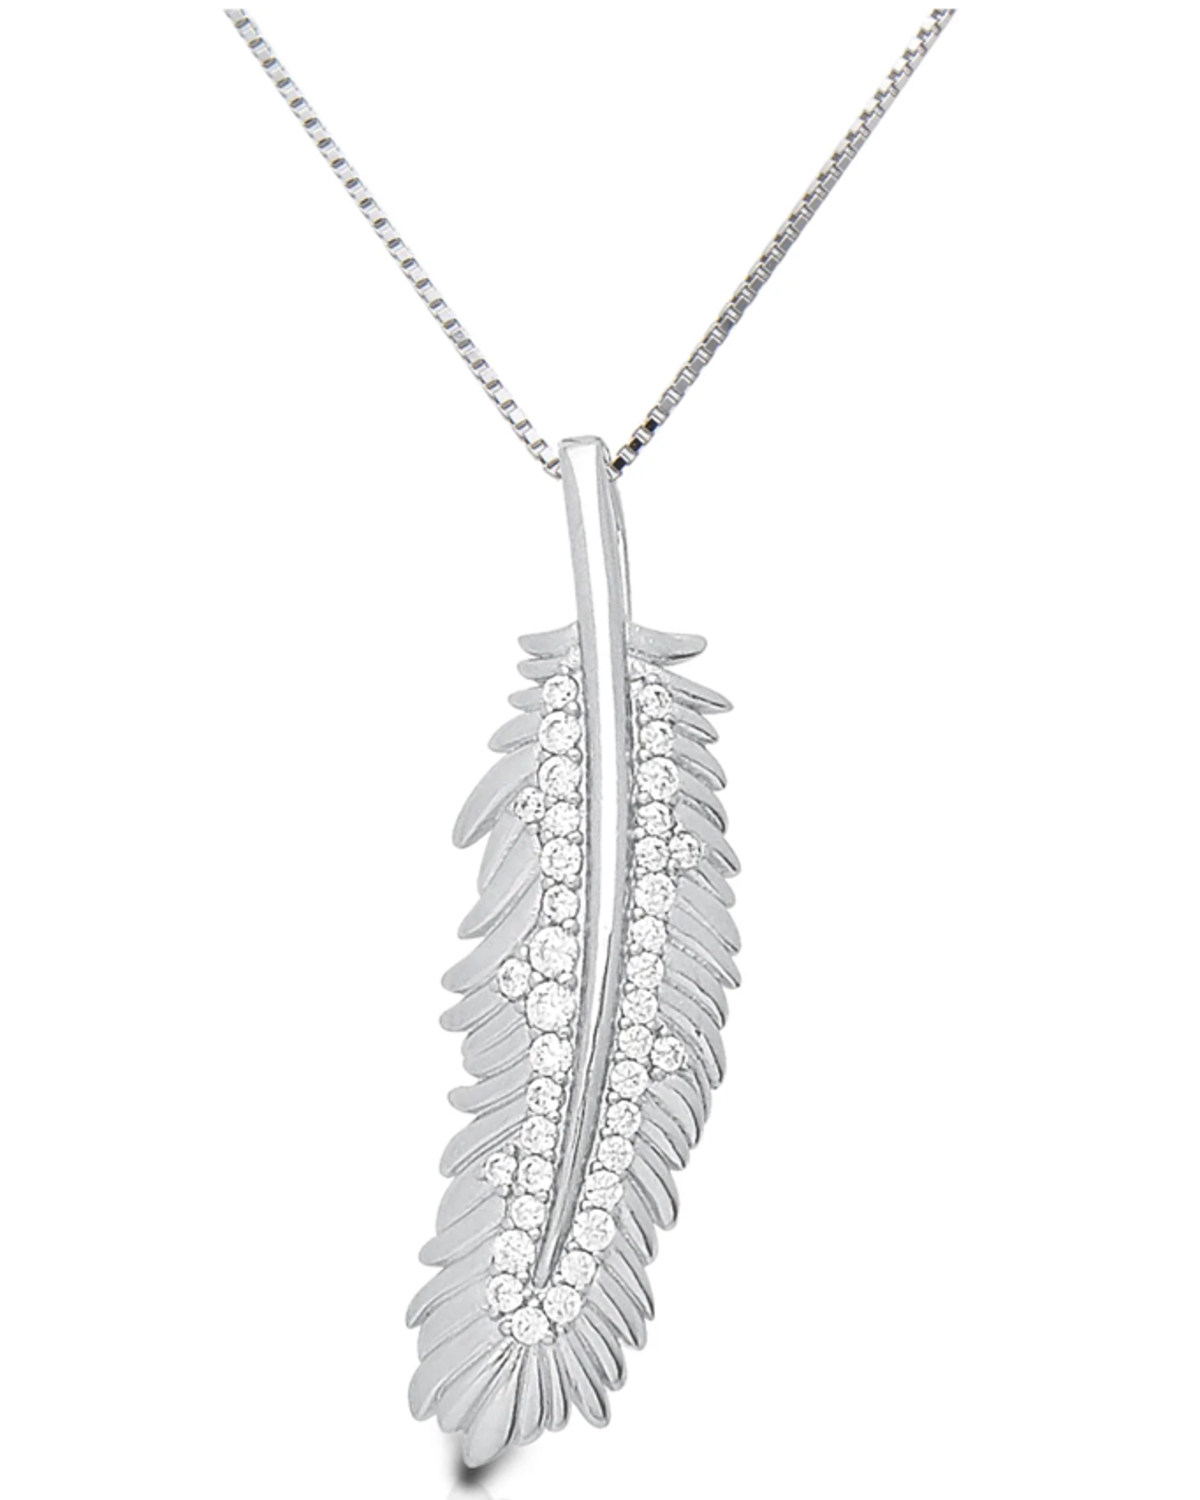 Kelly Herd Women's Silver Feather Pendant Necklace